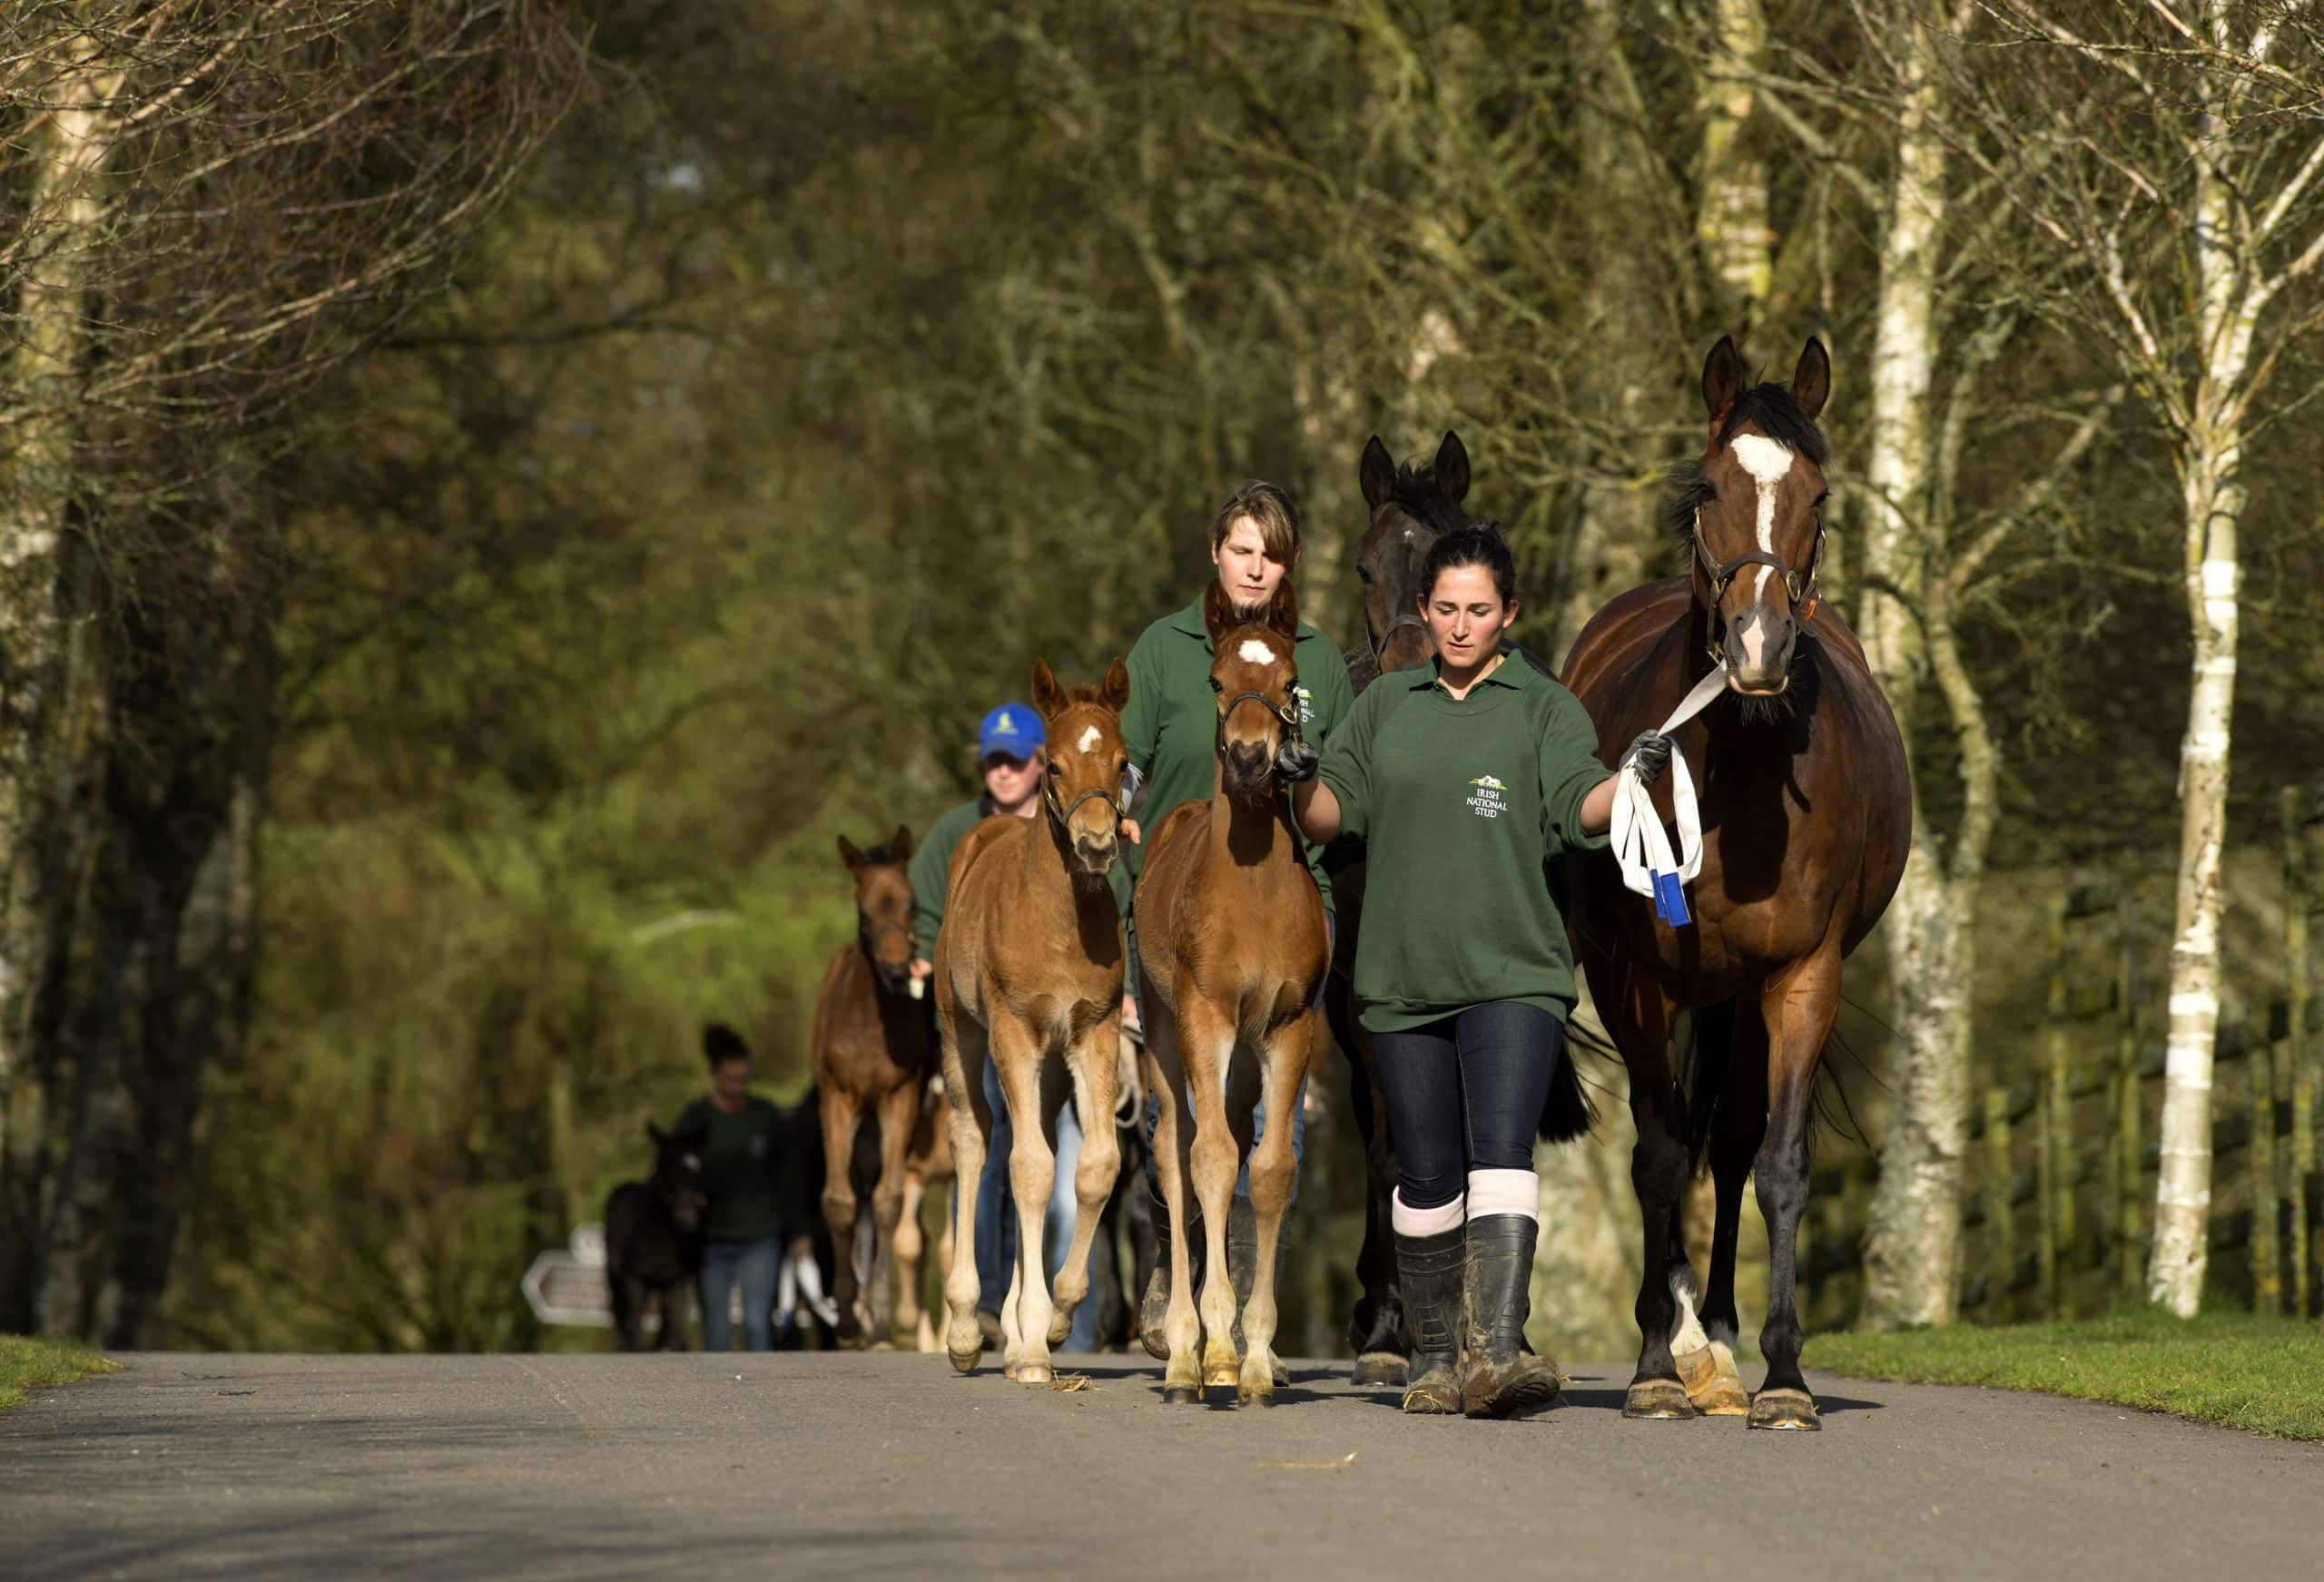 Mares and foals Irish National Stud